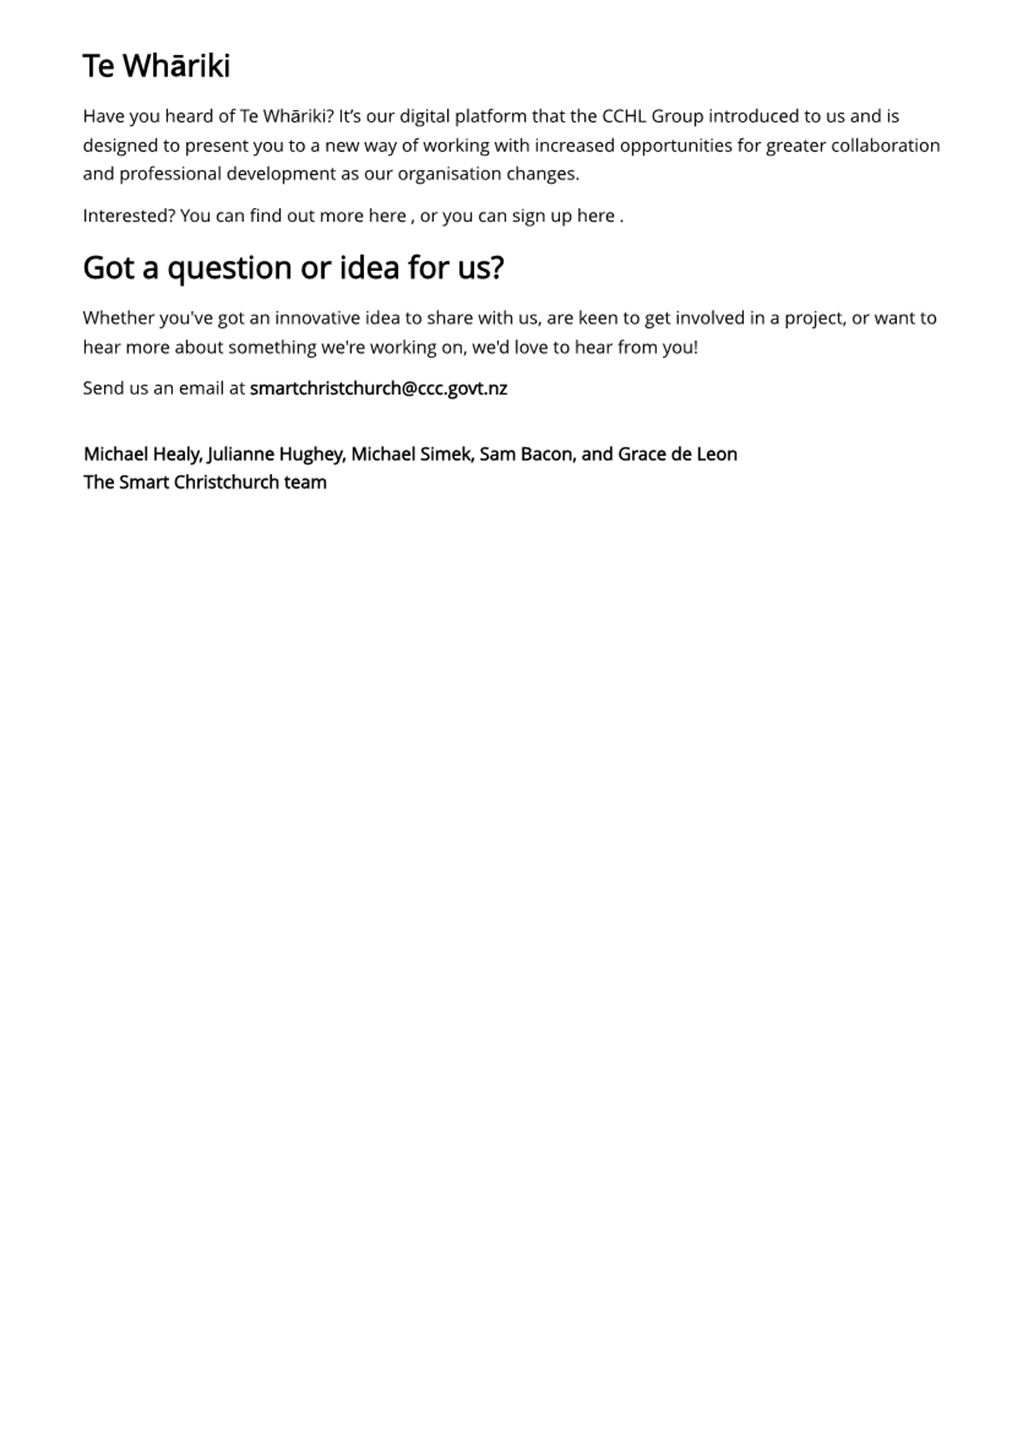 A screenshot of a questionnaire

Description automatically generated